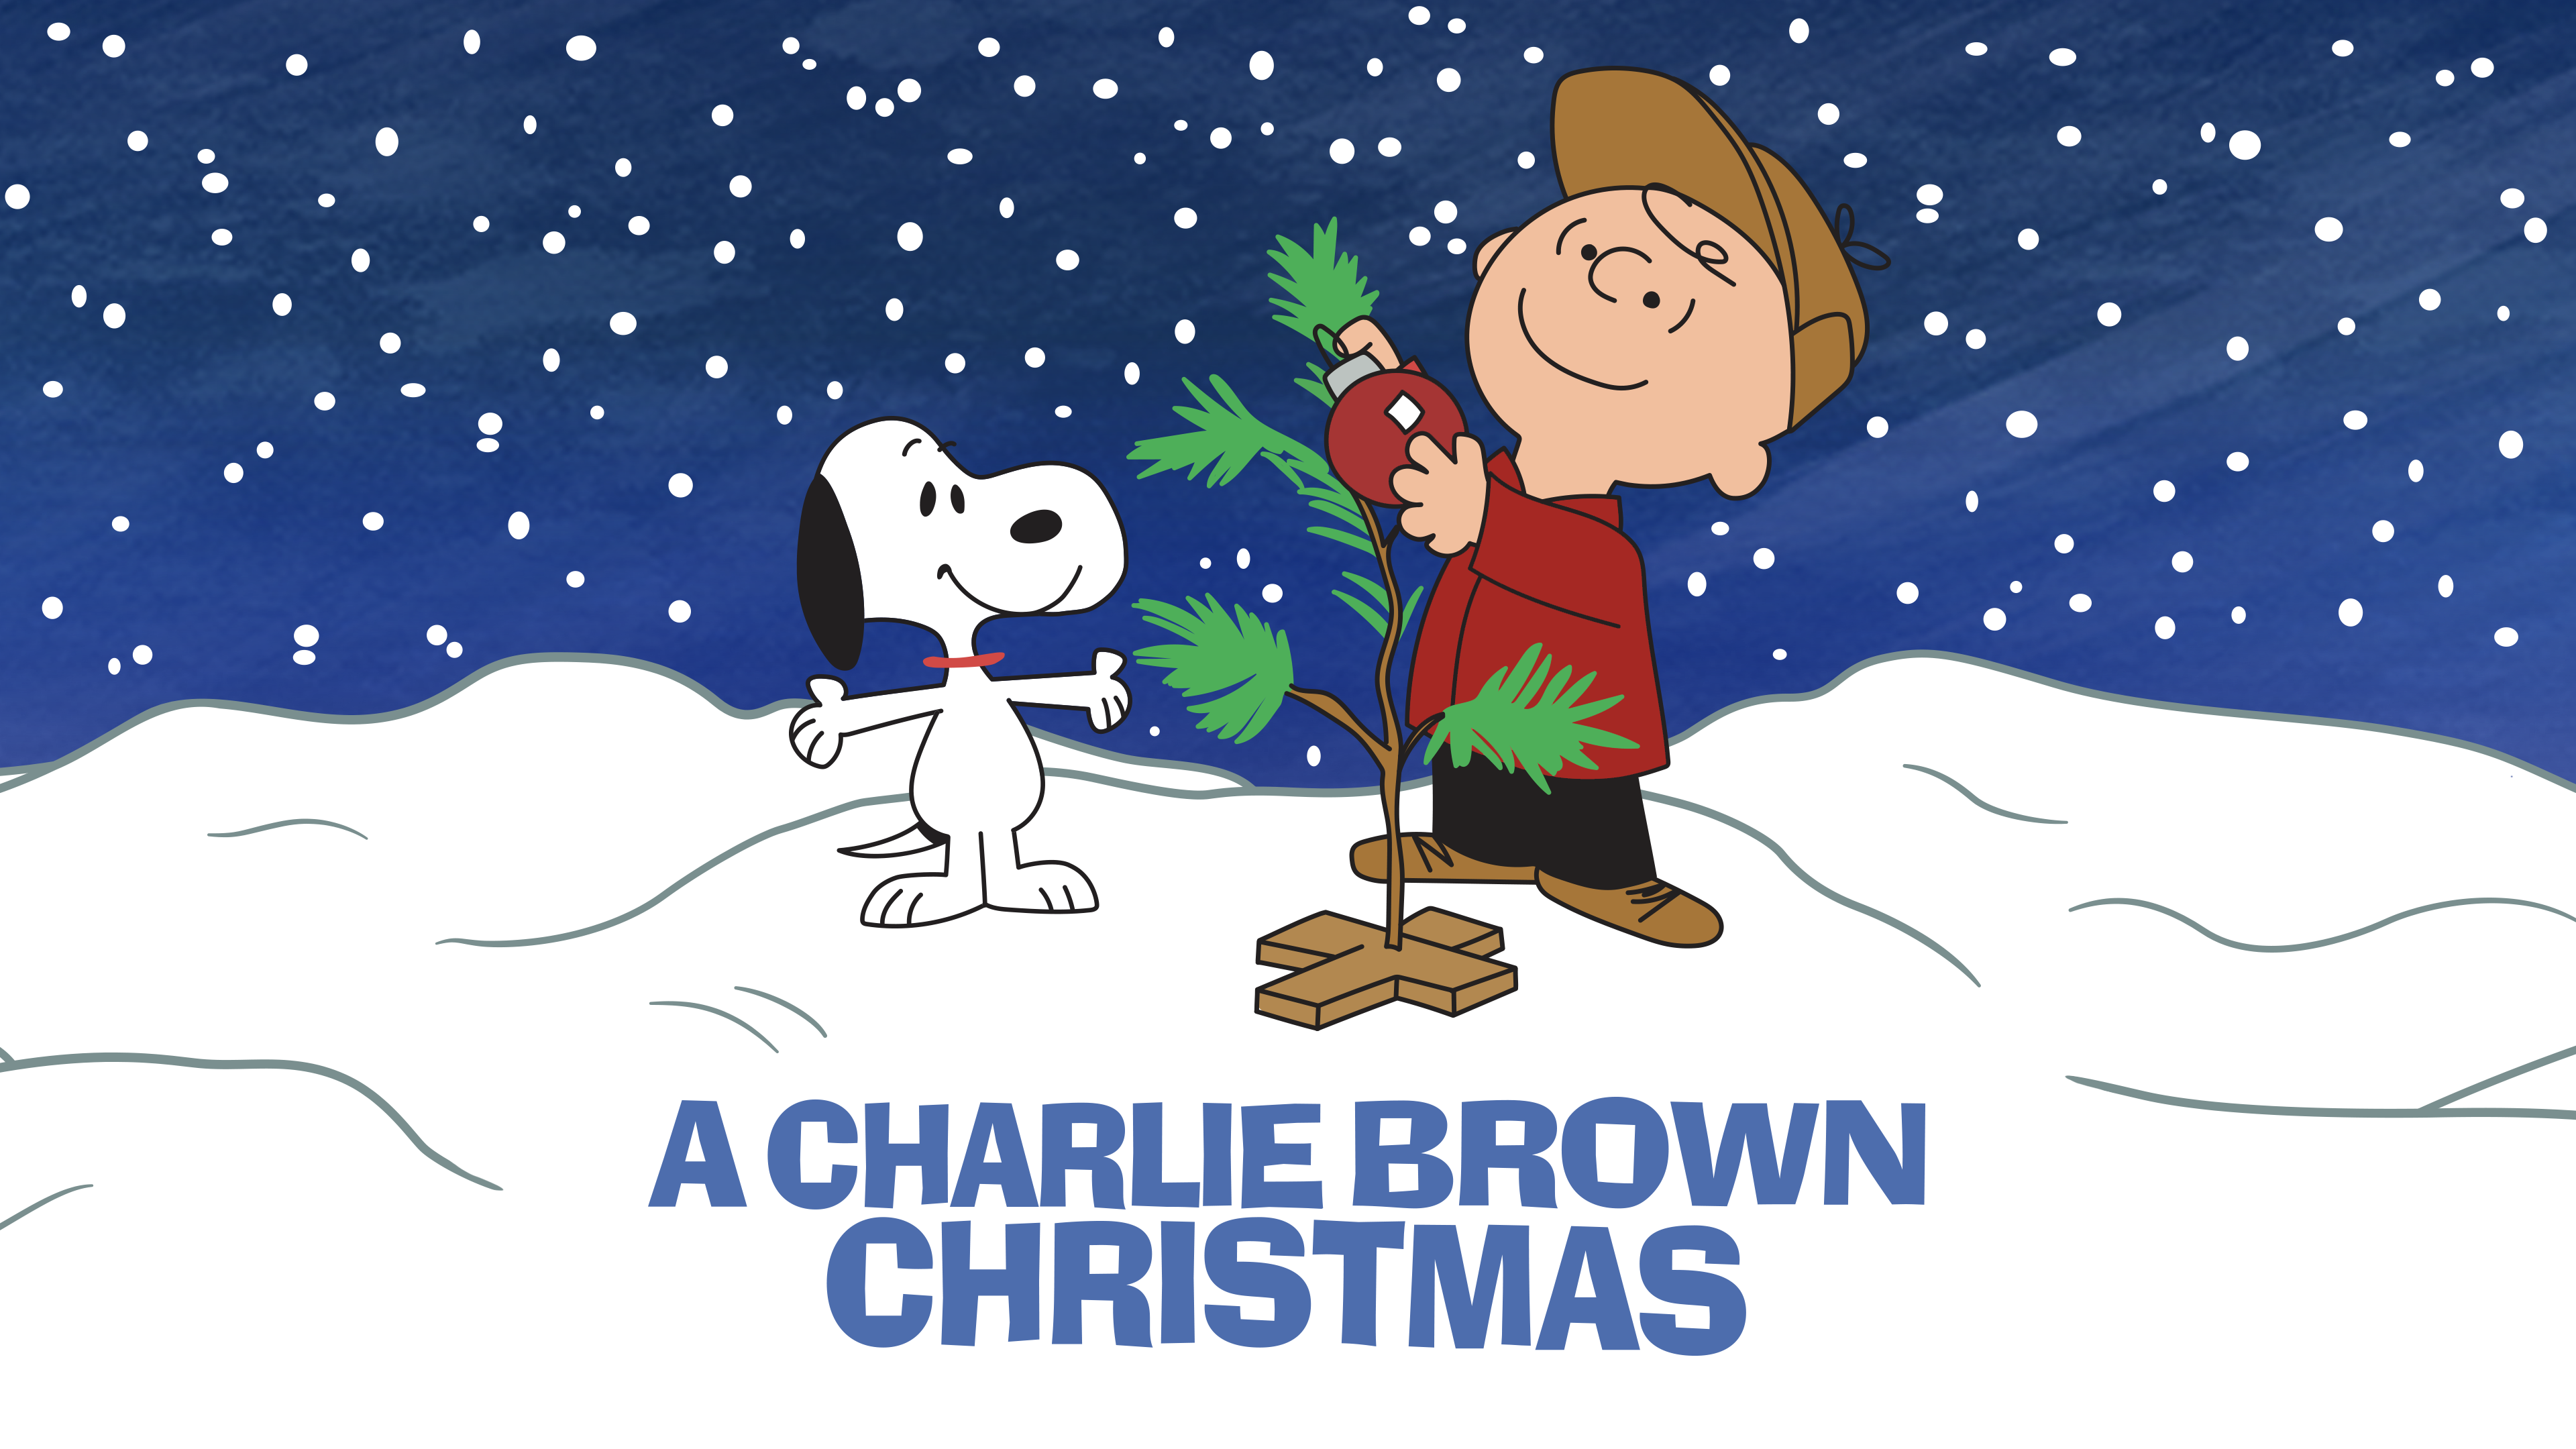 charlie brown and snoopy standing in snow with small christmas tree